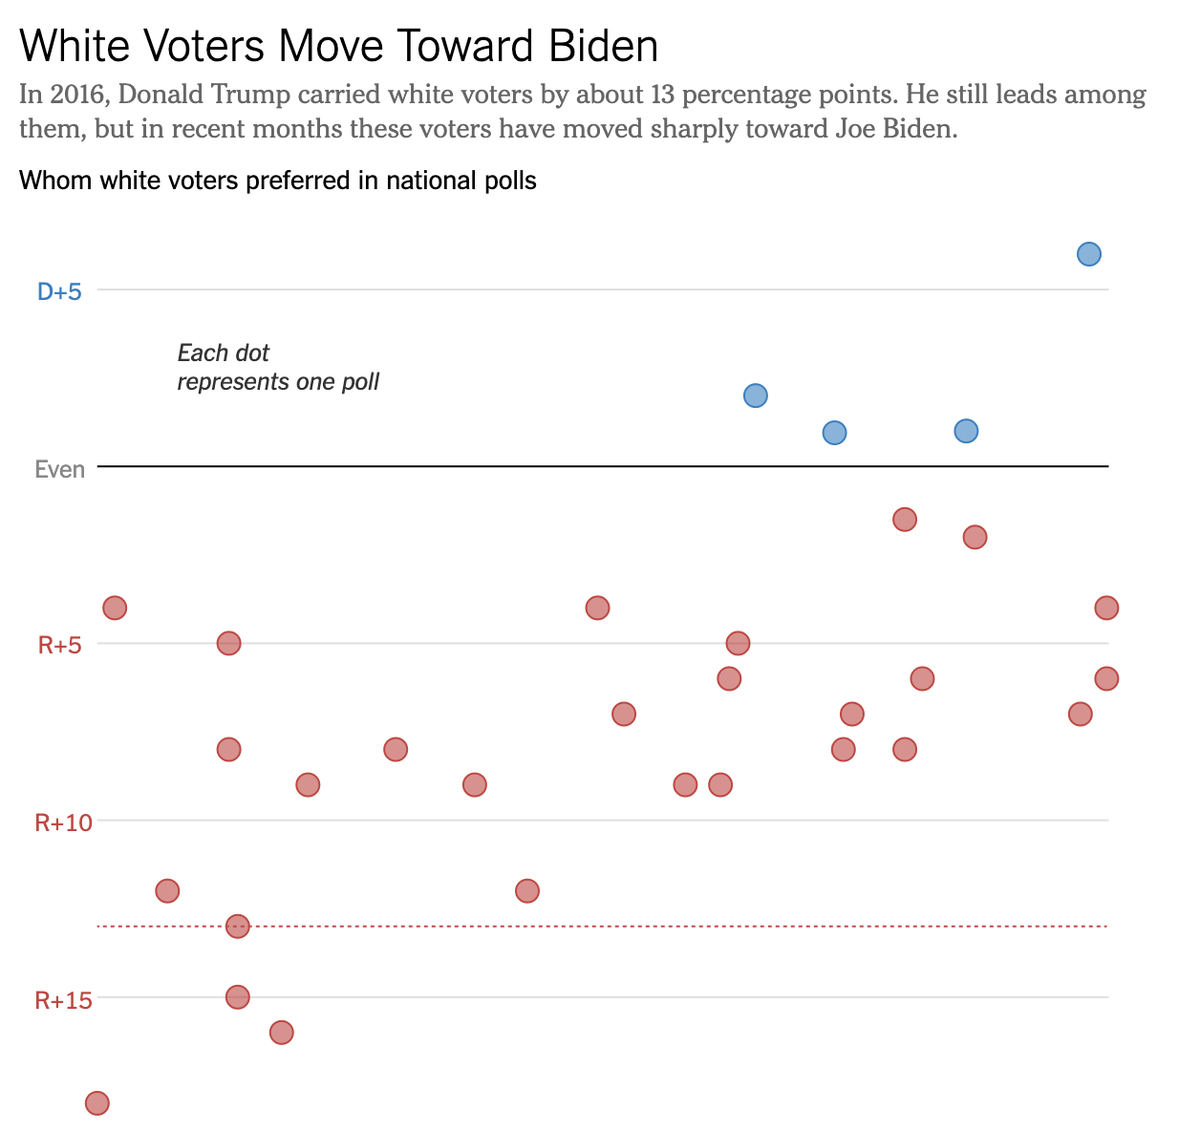 Trump's lead among white voters has all but vanished. Anything like it threatens longstanding GOP structural advantages  https://www.nytimes.com/2020/07/24/upshot/biden-polls-demographics.html